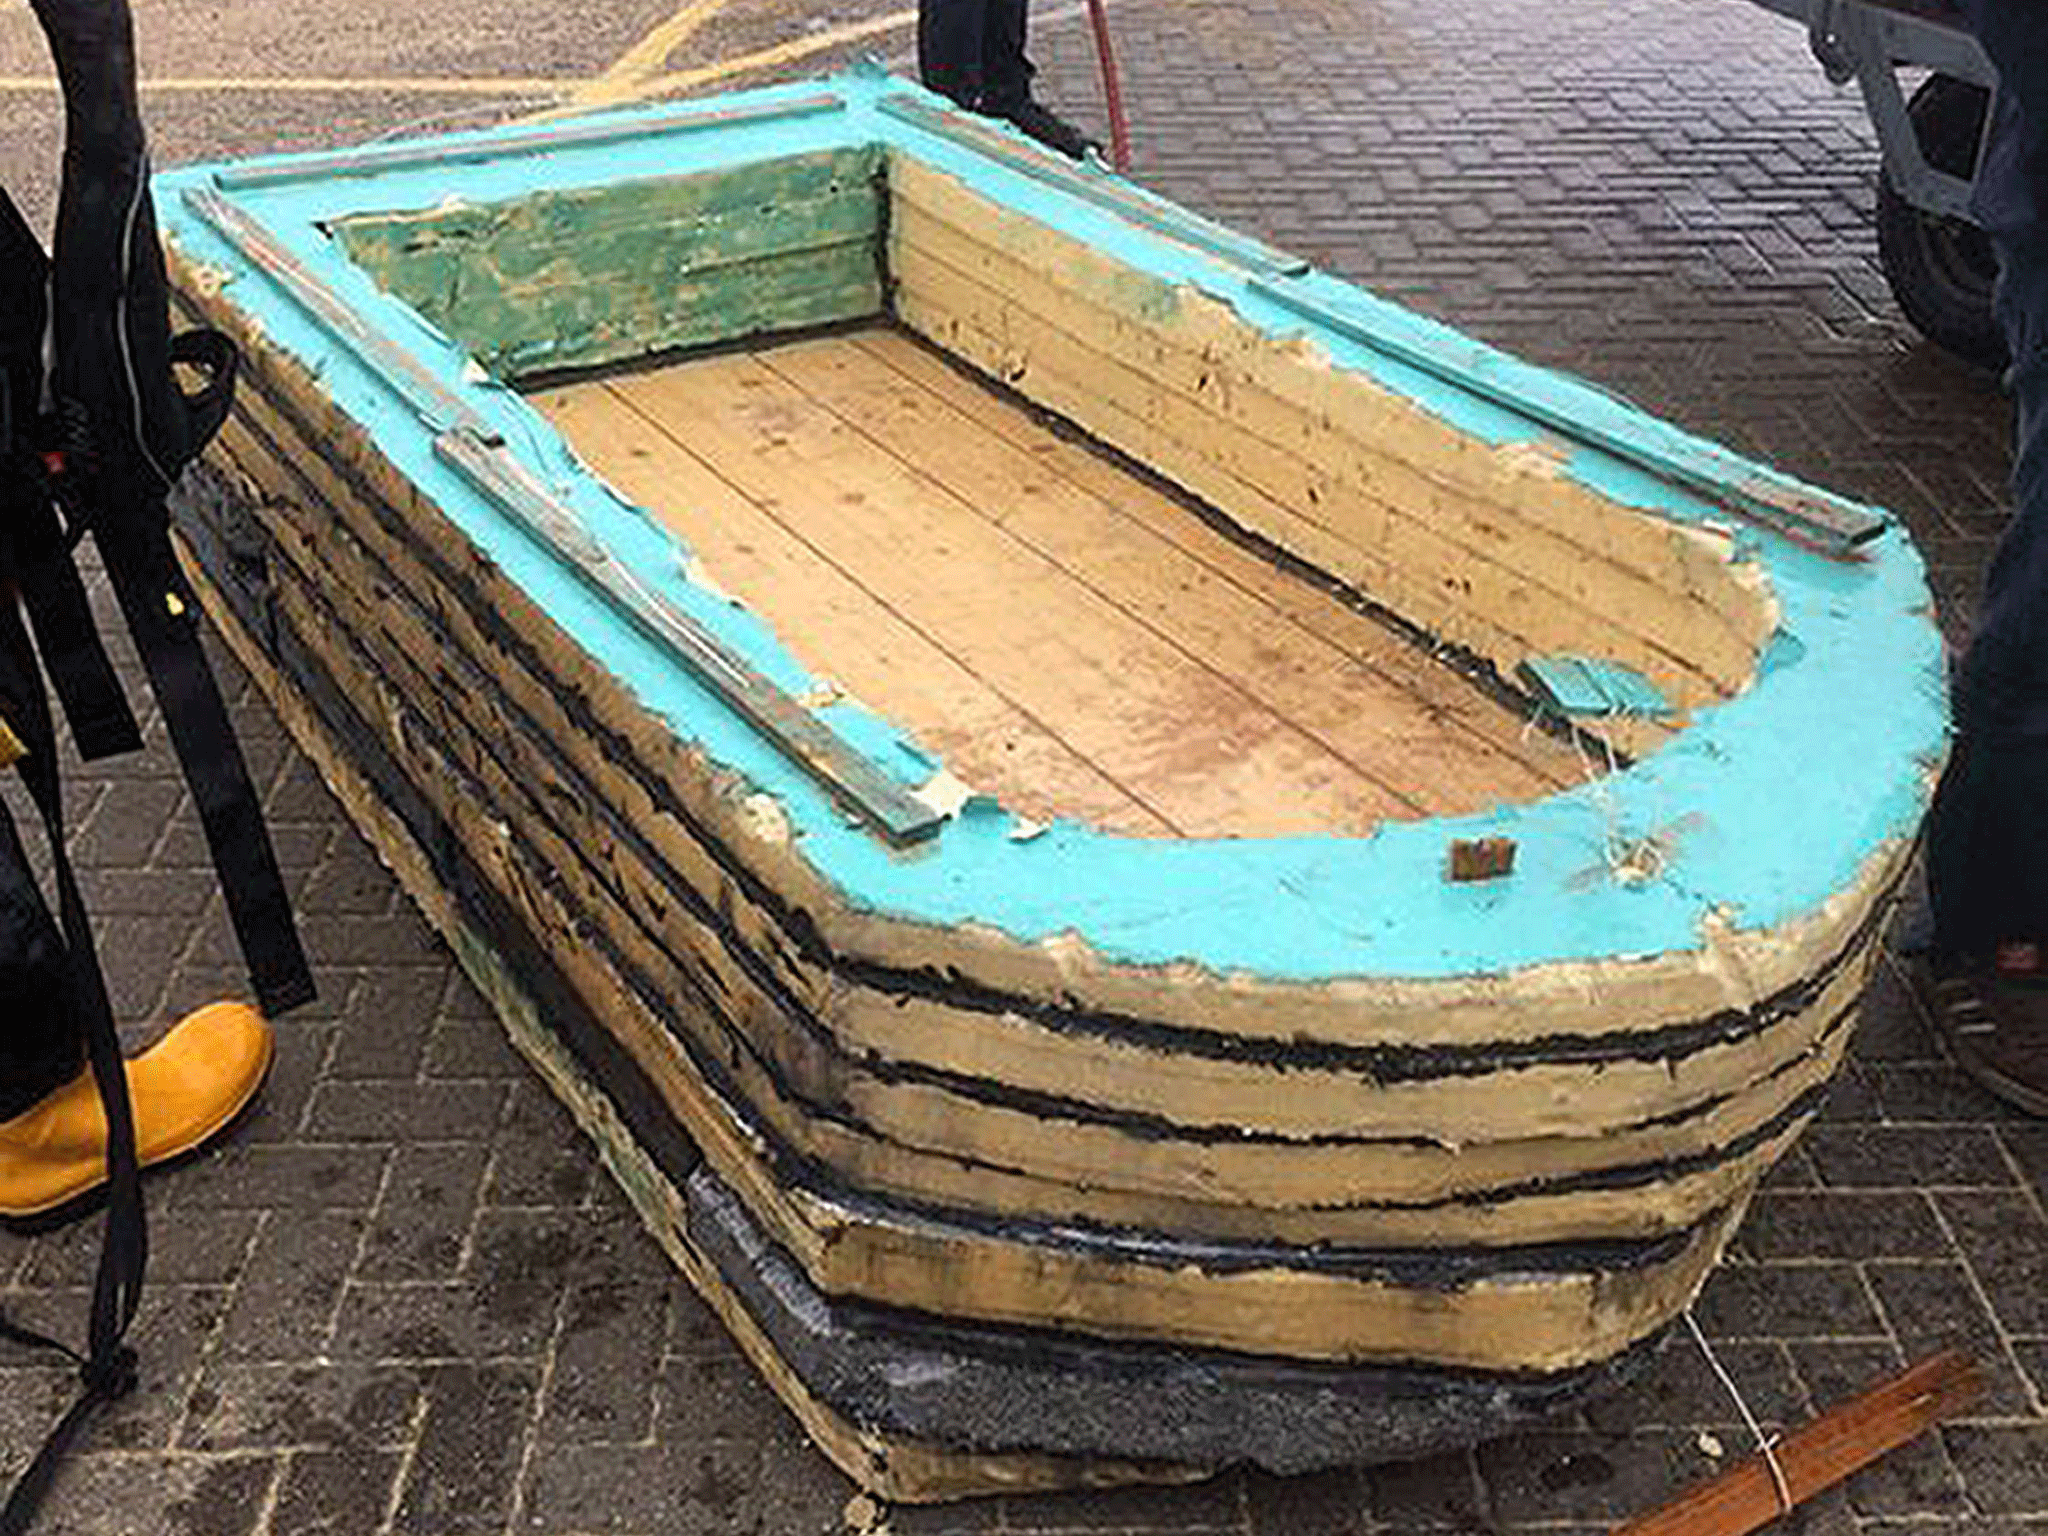 Two men rescued after becoming stranded at sea in homemade ...